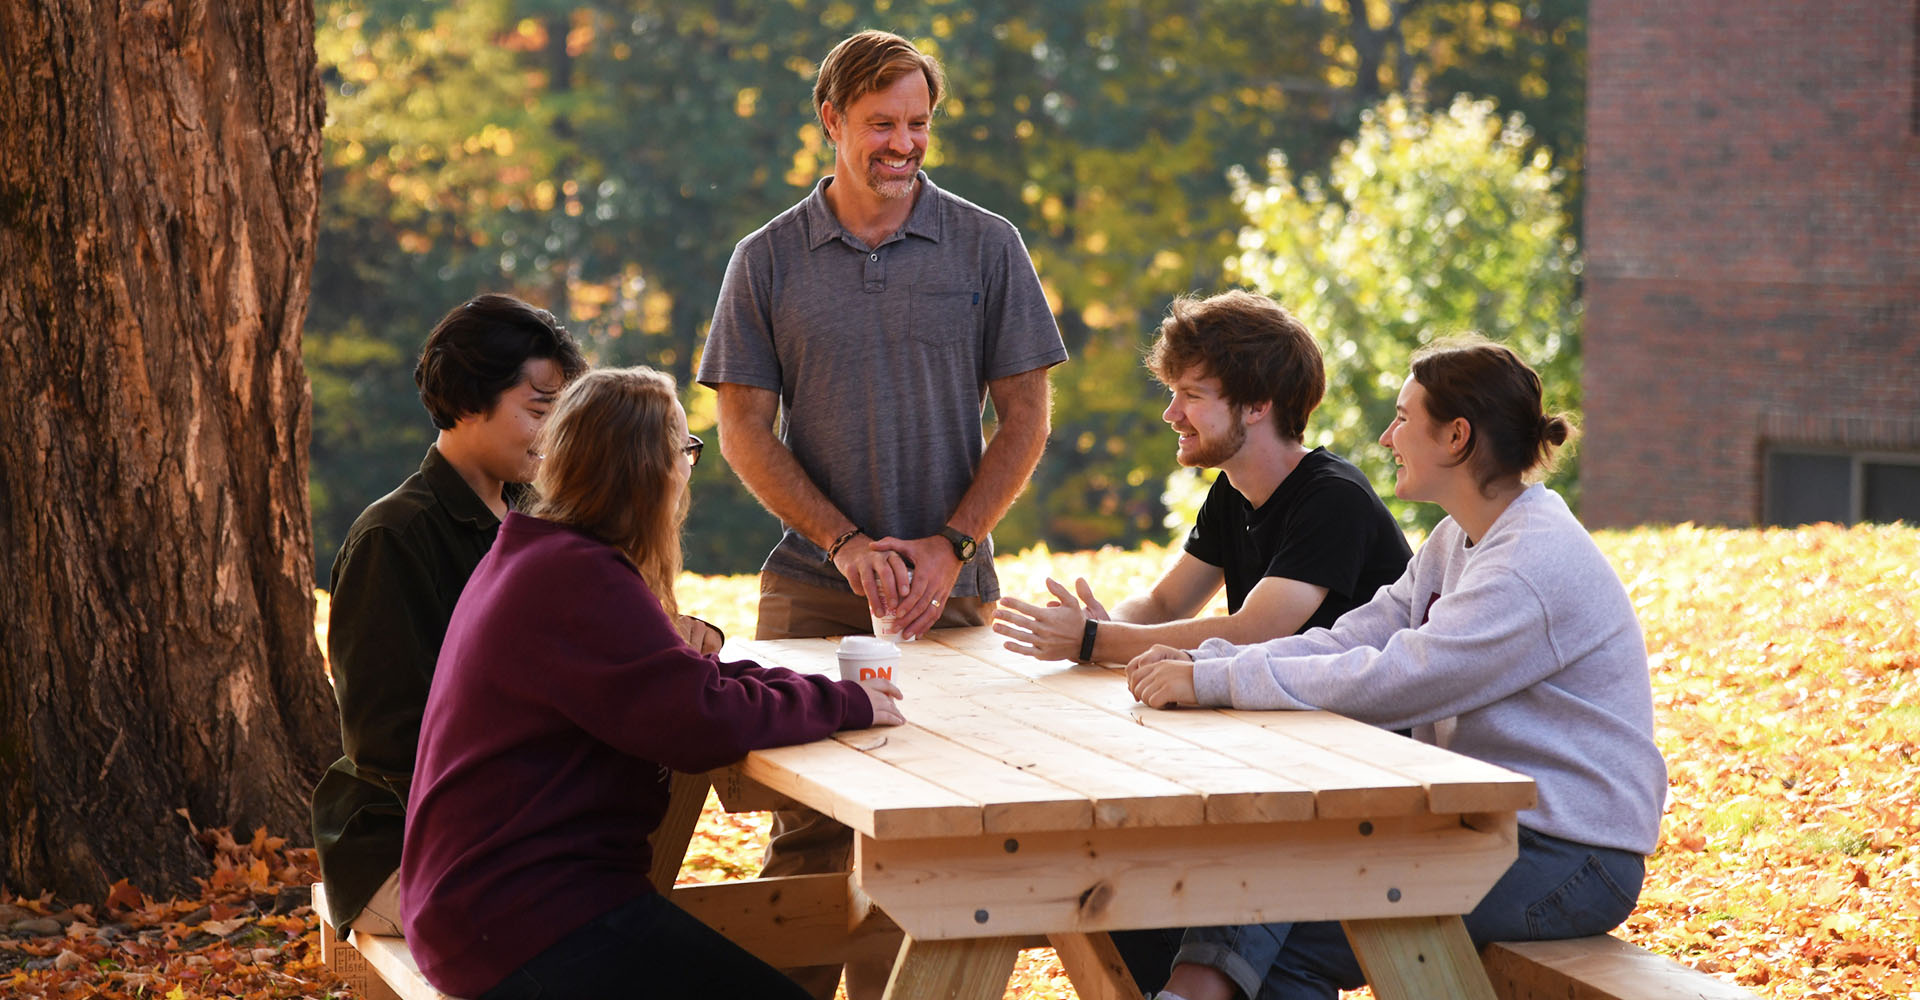 Faculty member with students at an outdoor picnic table